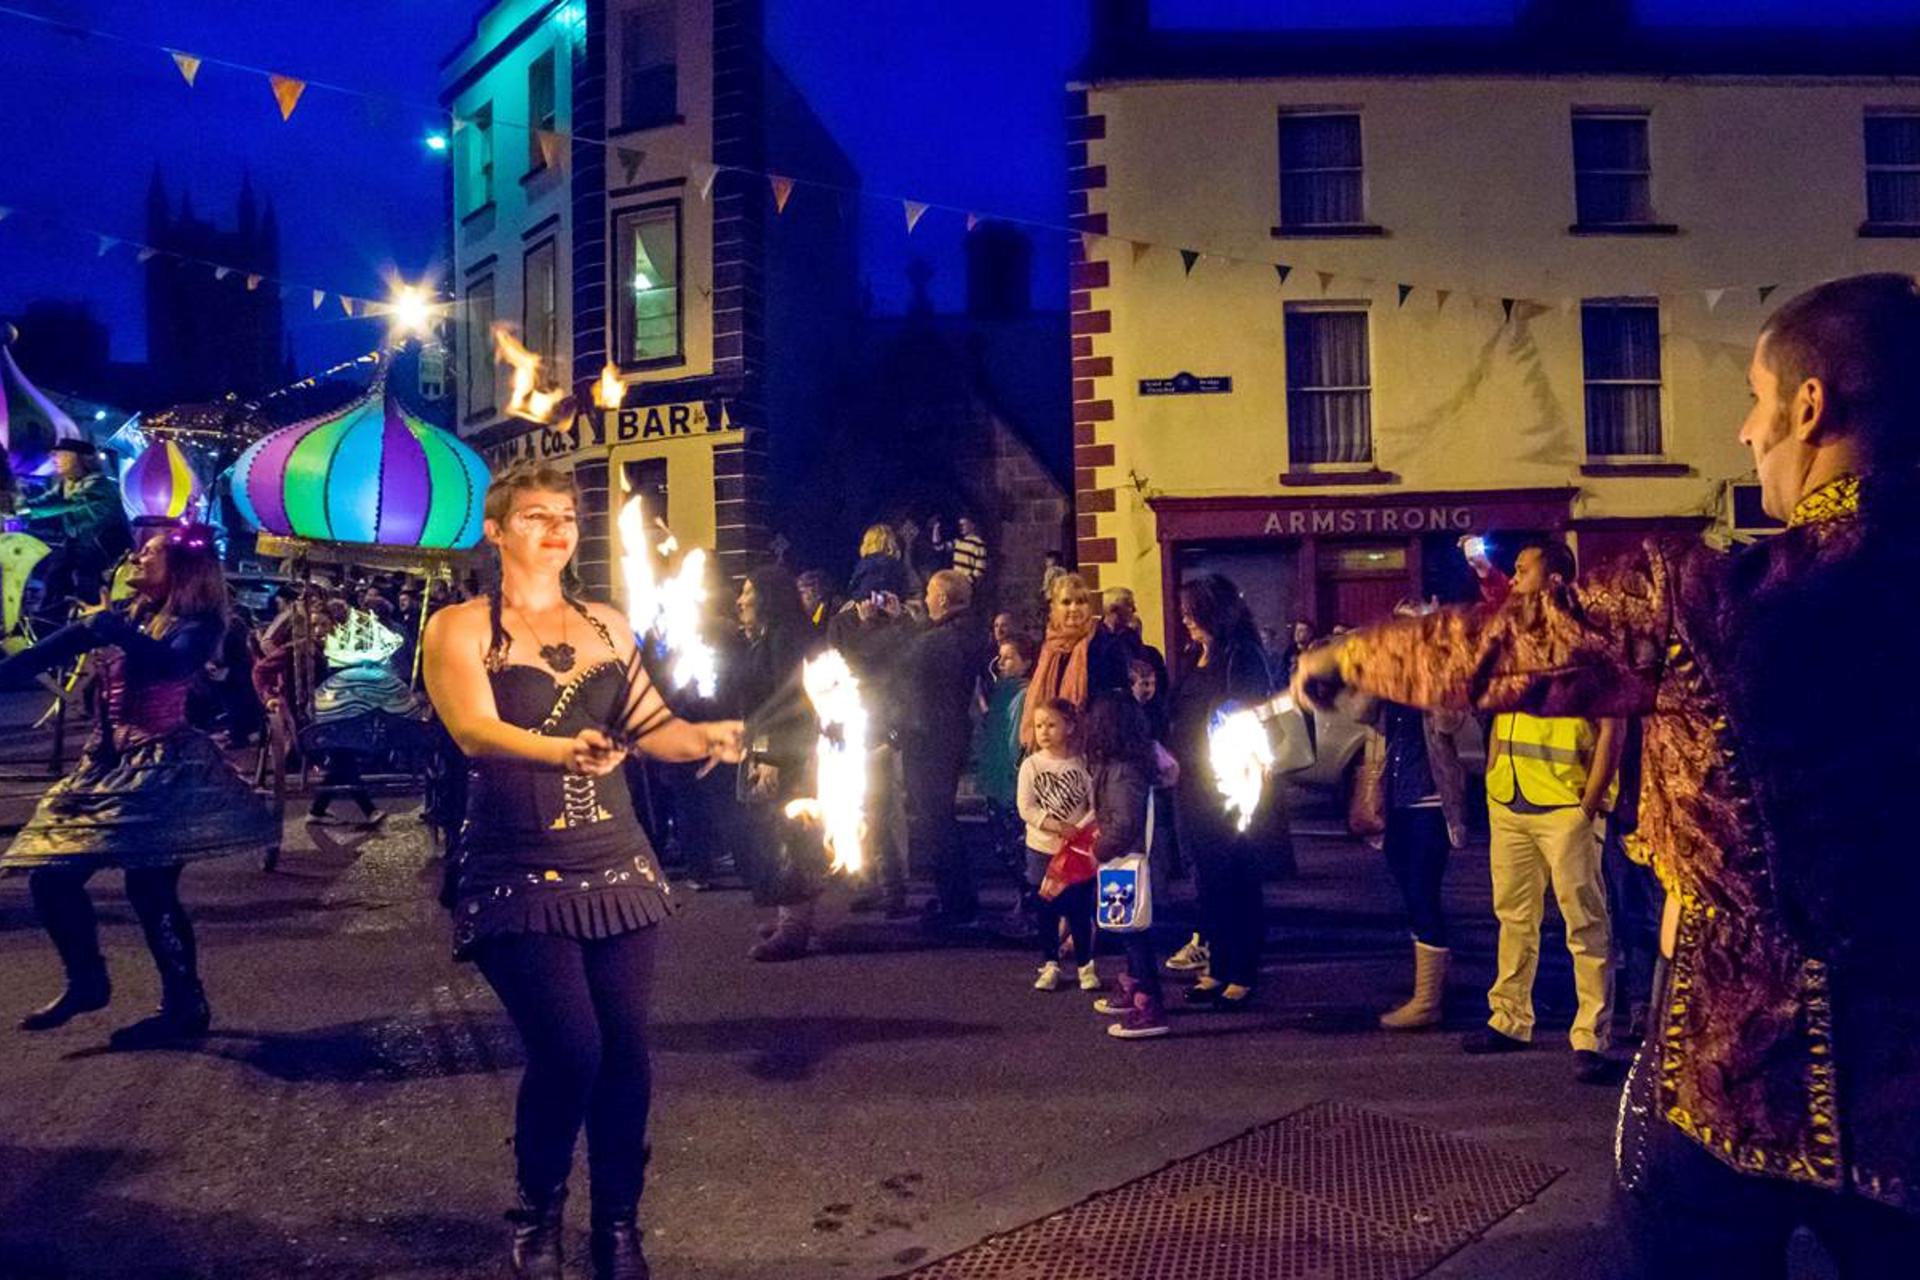 Carrick-on-shannon, Ireland Party Events | Eventbrite